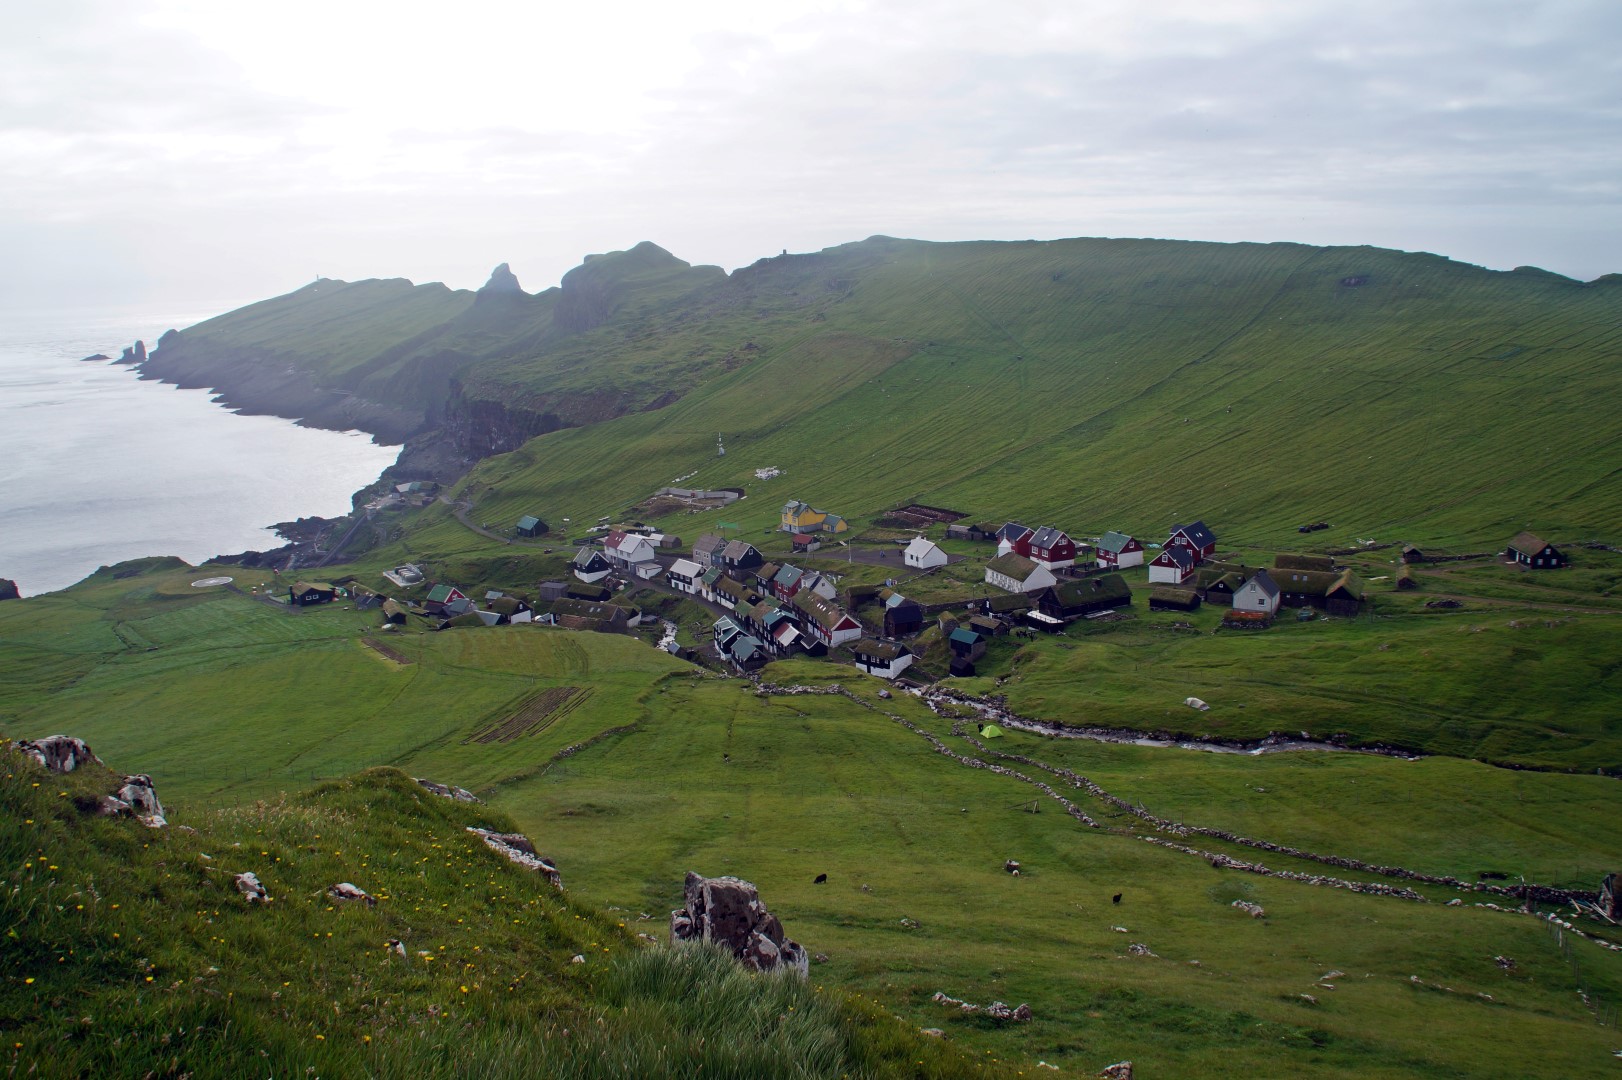 Arriving in Mykines Bygd at the end of the hike